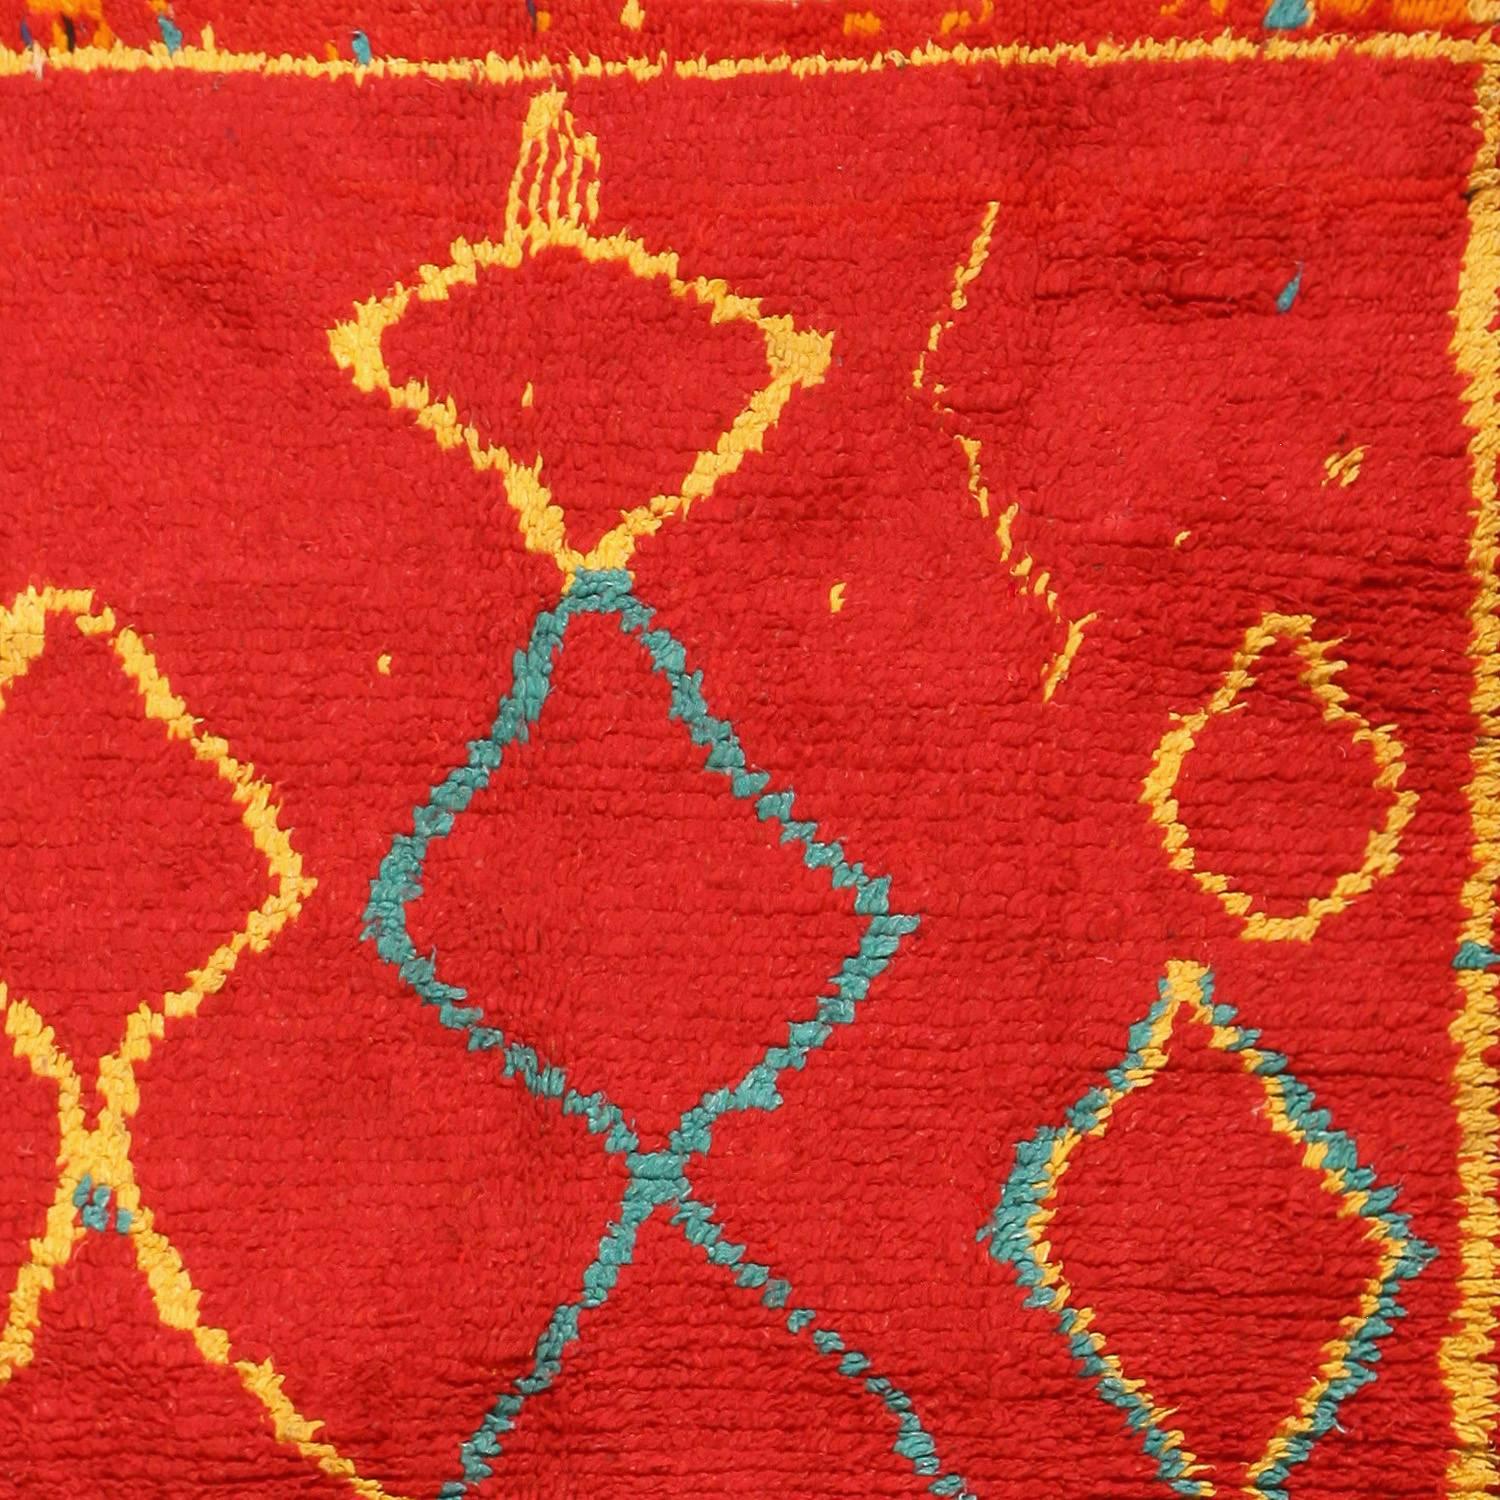 This vintage Moroccan shag rug is a vivid Berber rug, full of warmth with a red background color. Over this cheerful carmine, thickly lined figures in gentle blue and sunny yellow are picked out. Arranged singly or in pairs, the shapes are